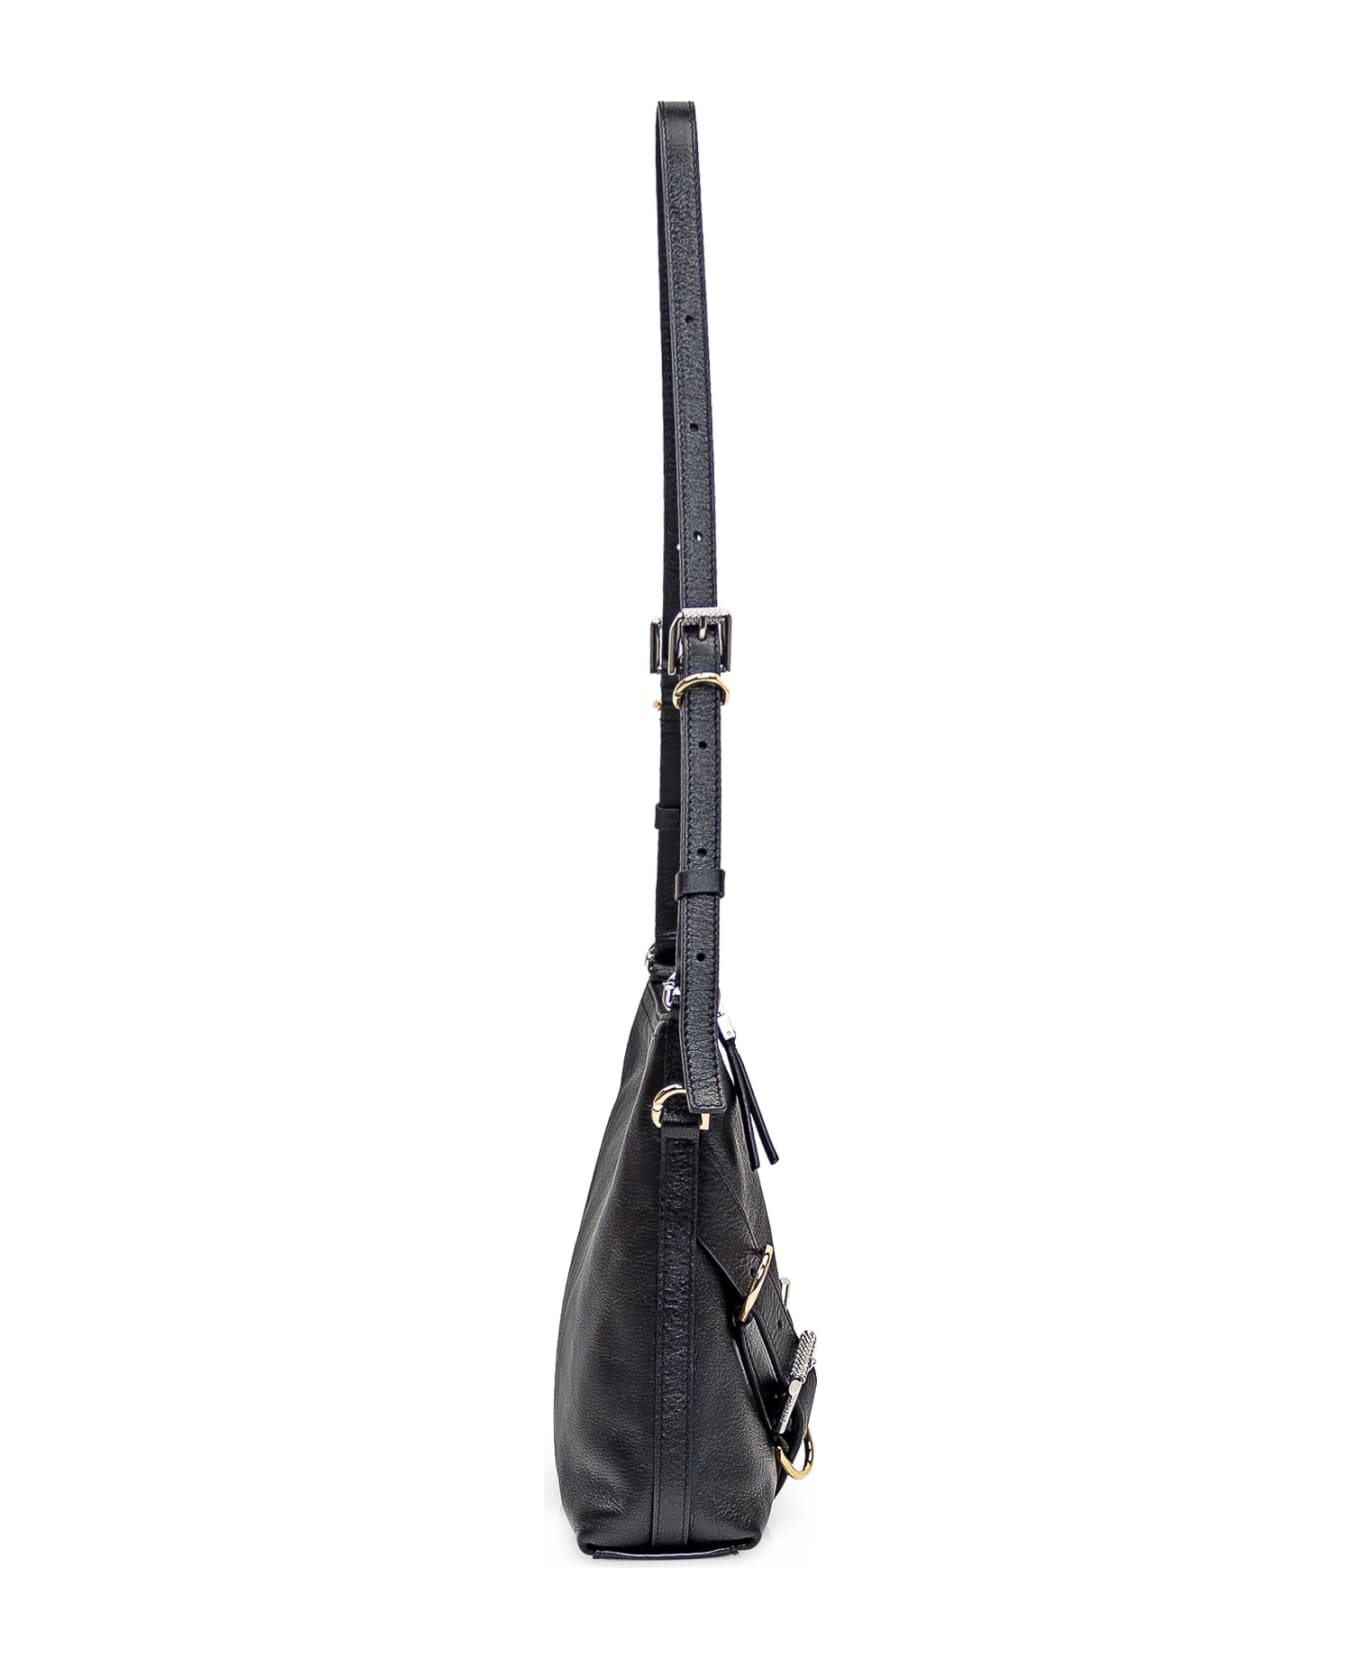 Givenchy Voyou Leather Crossbody Bag - BLACK ショルダーバッグ